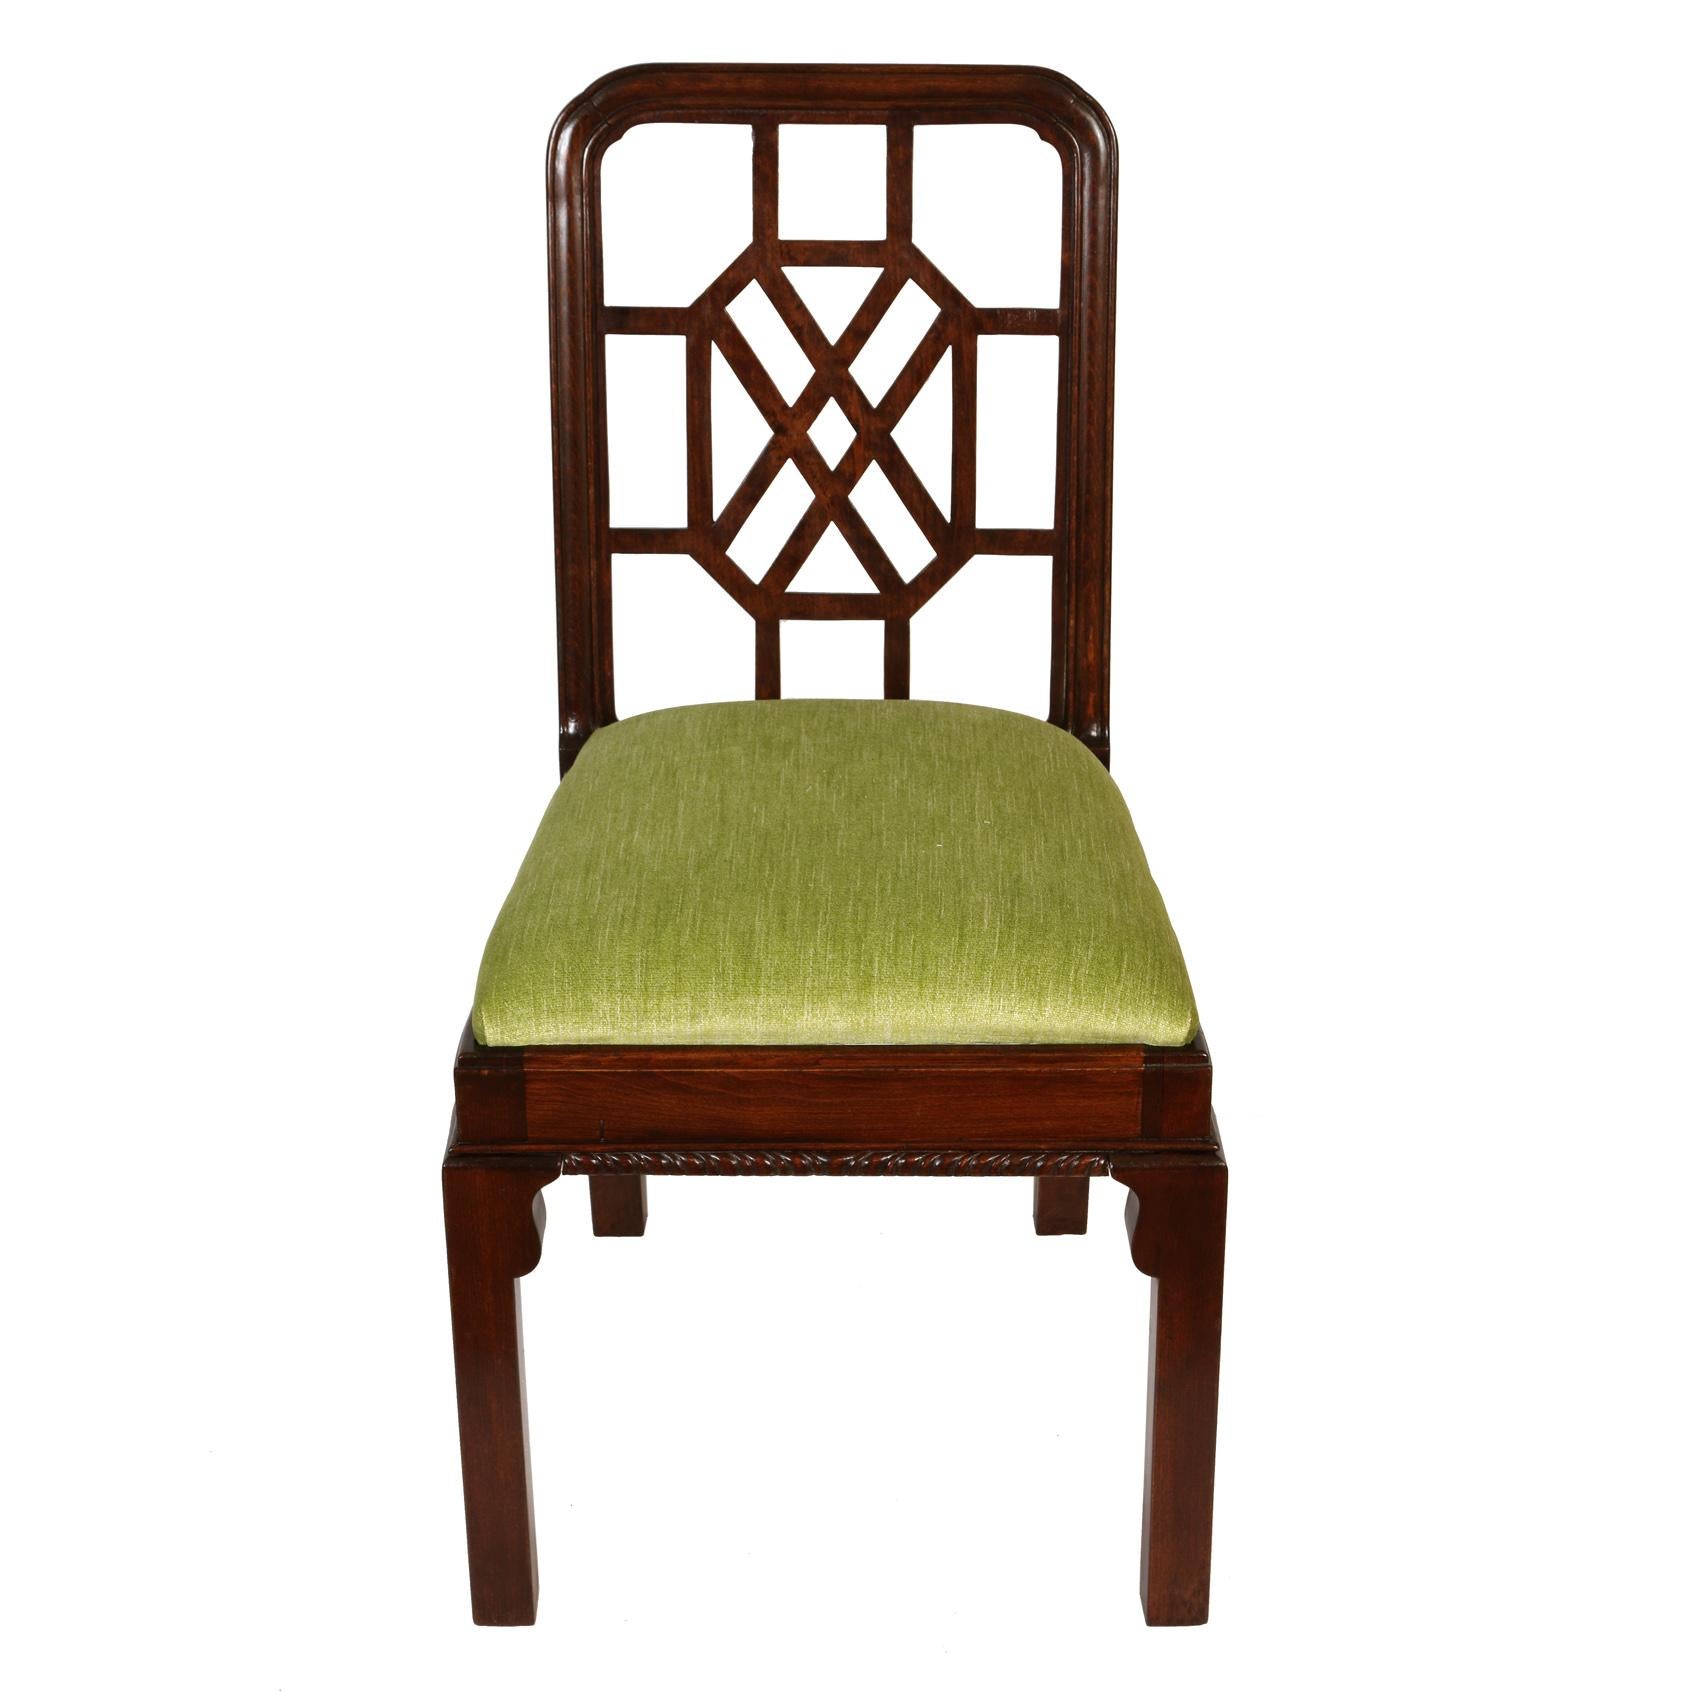 A set of twelve mid century mahogany Chippendale fretwork dining chairs, two armchairs and ten side chairs. Newly upholstered with light green velvet seat cushions. Armchairs measure 23